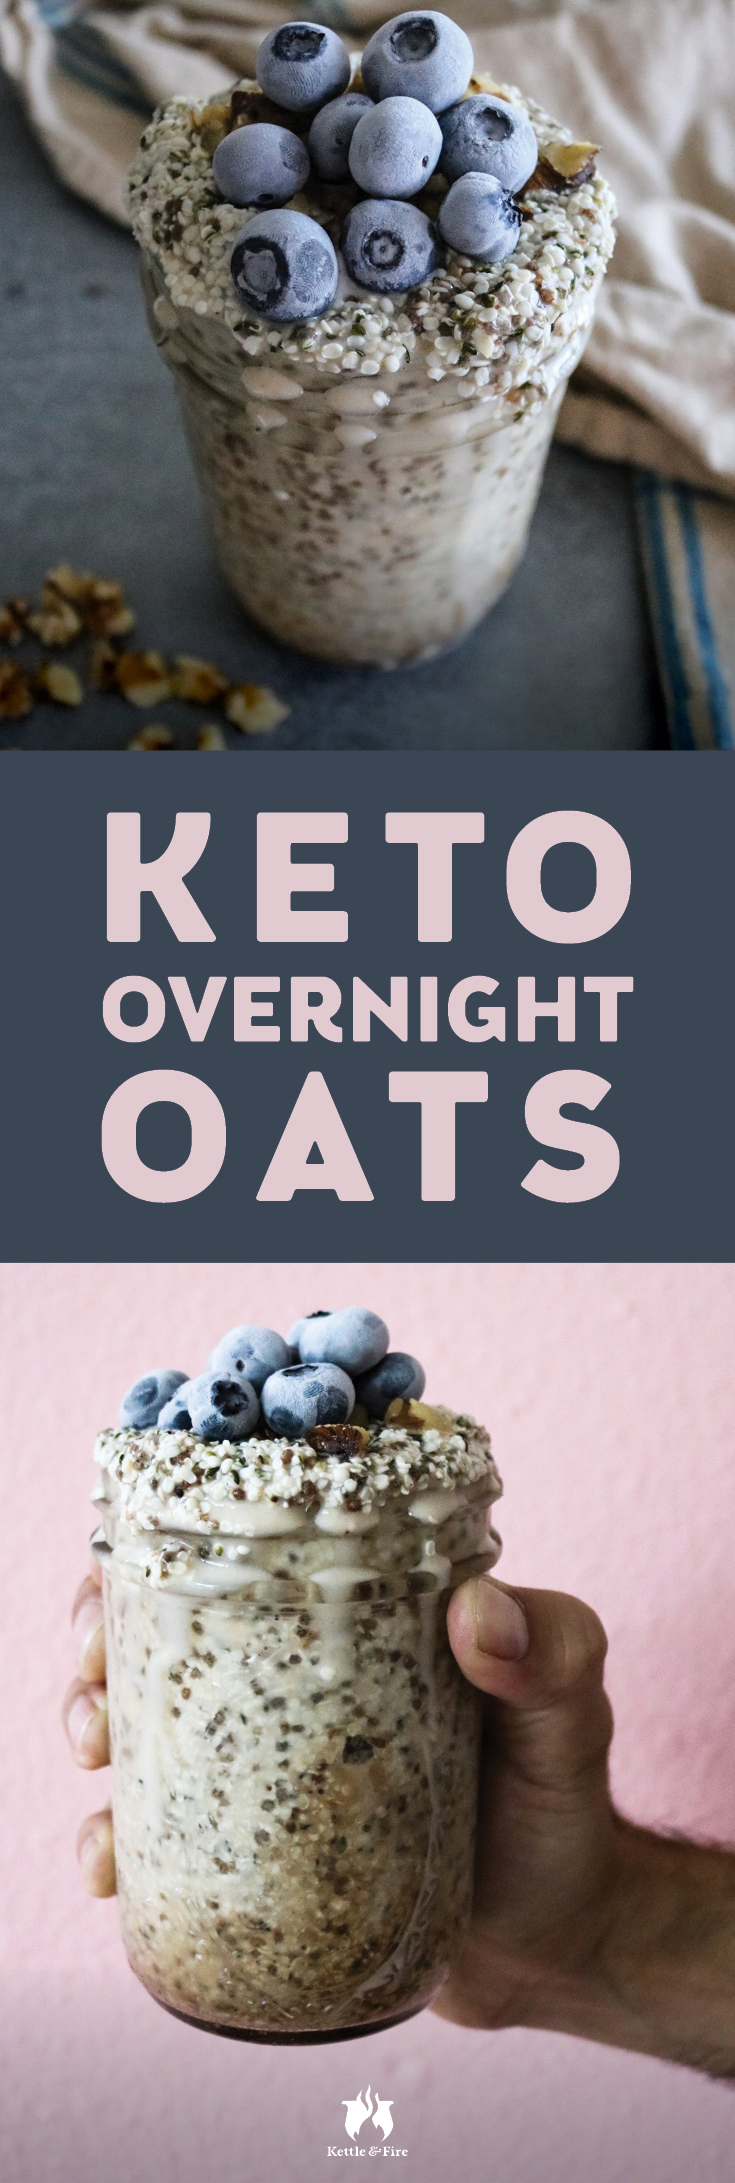 A new spin on traditional overnight oats, this Keto overnight oats recipe is so full of healthy fats, fiber, and flavor. 